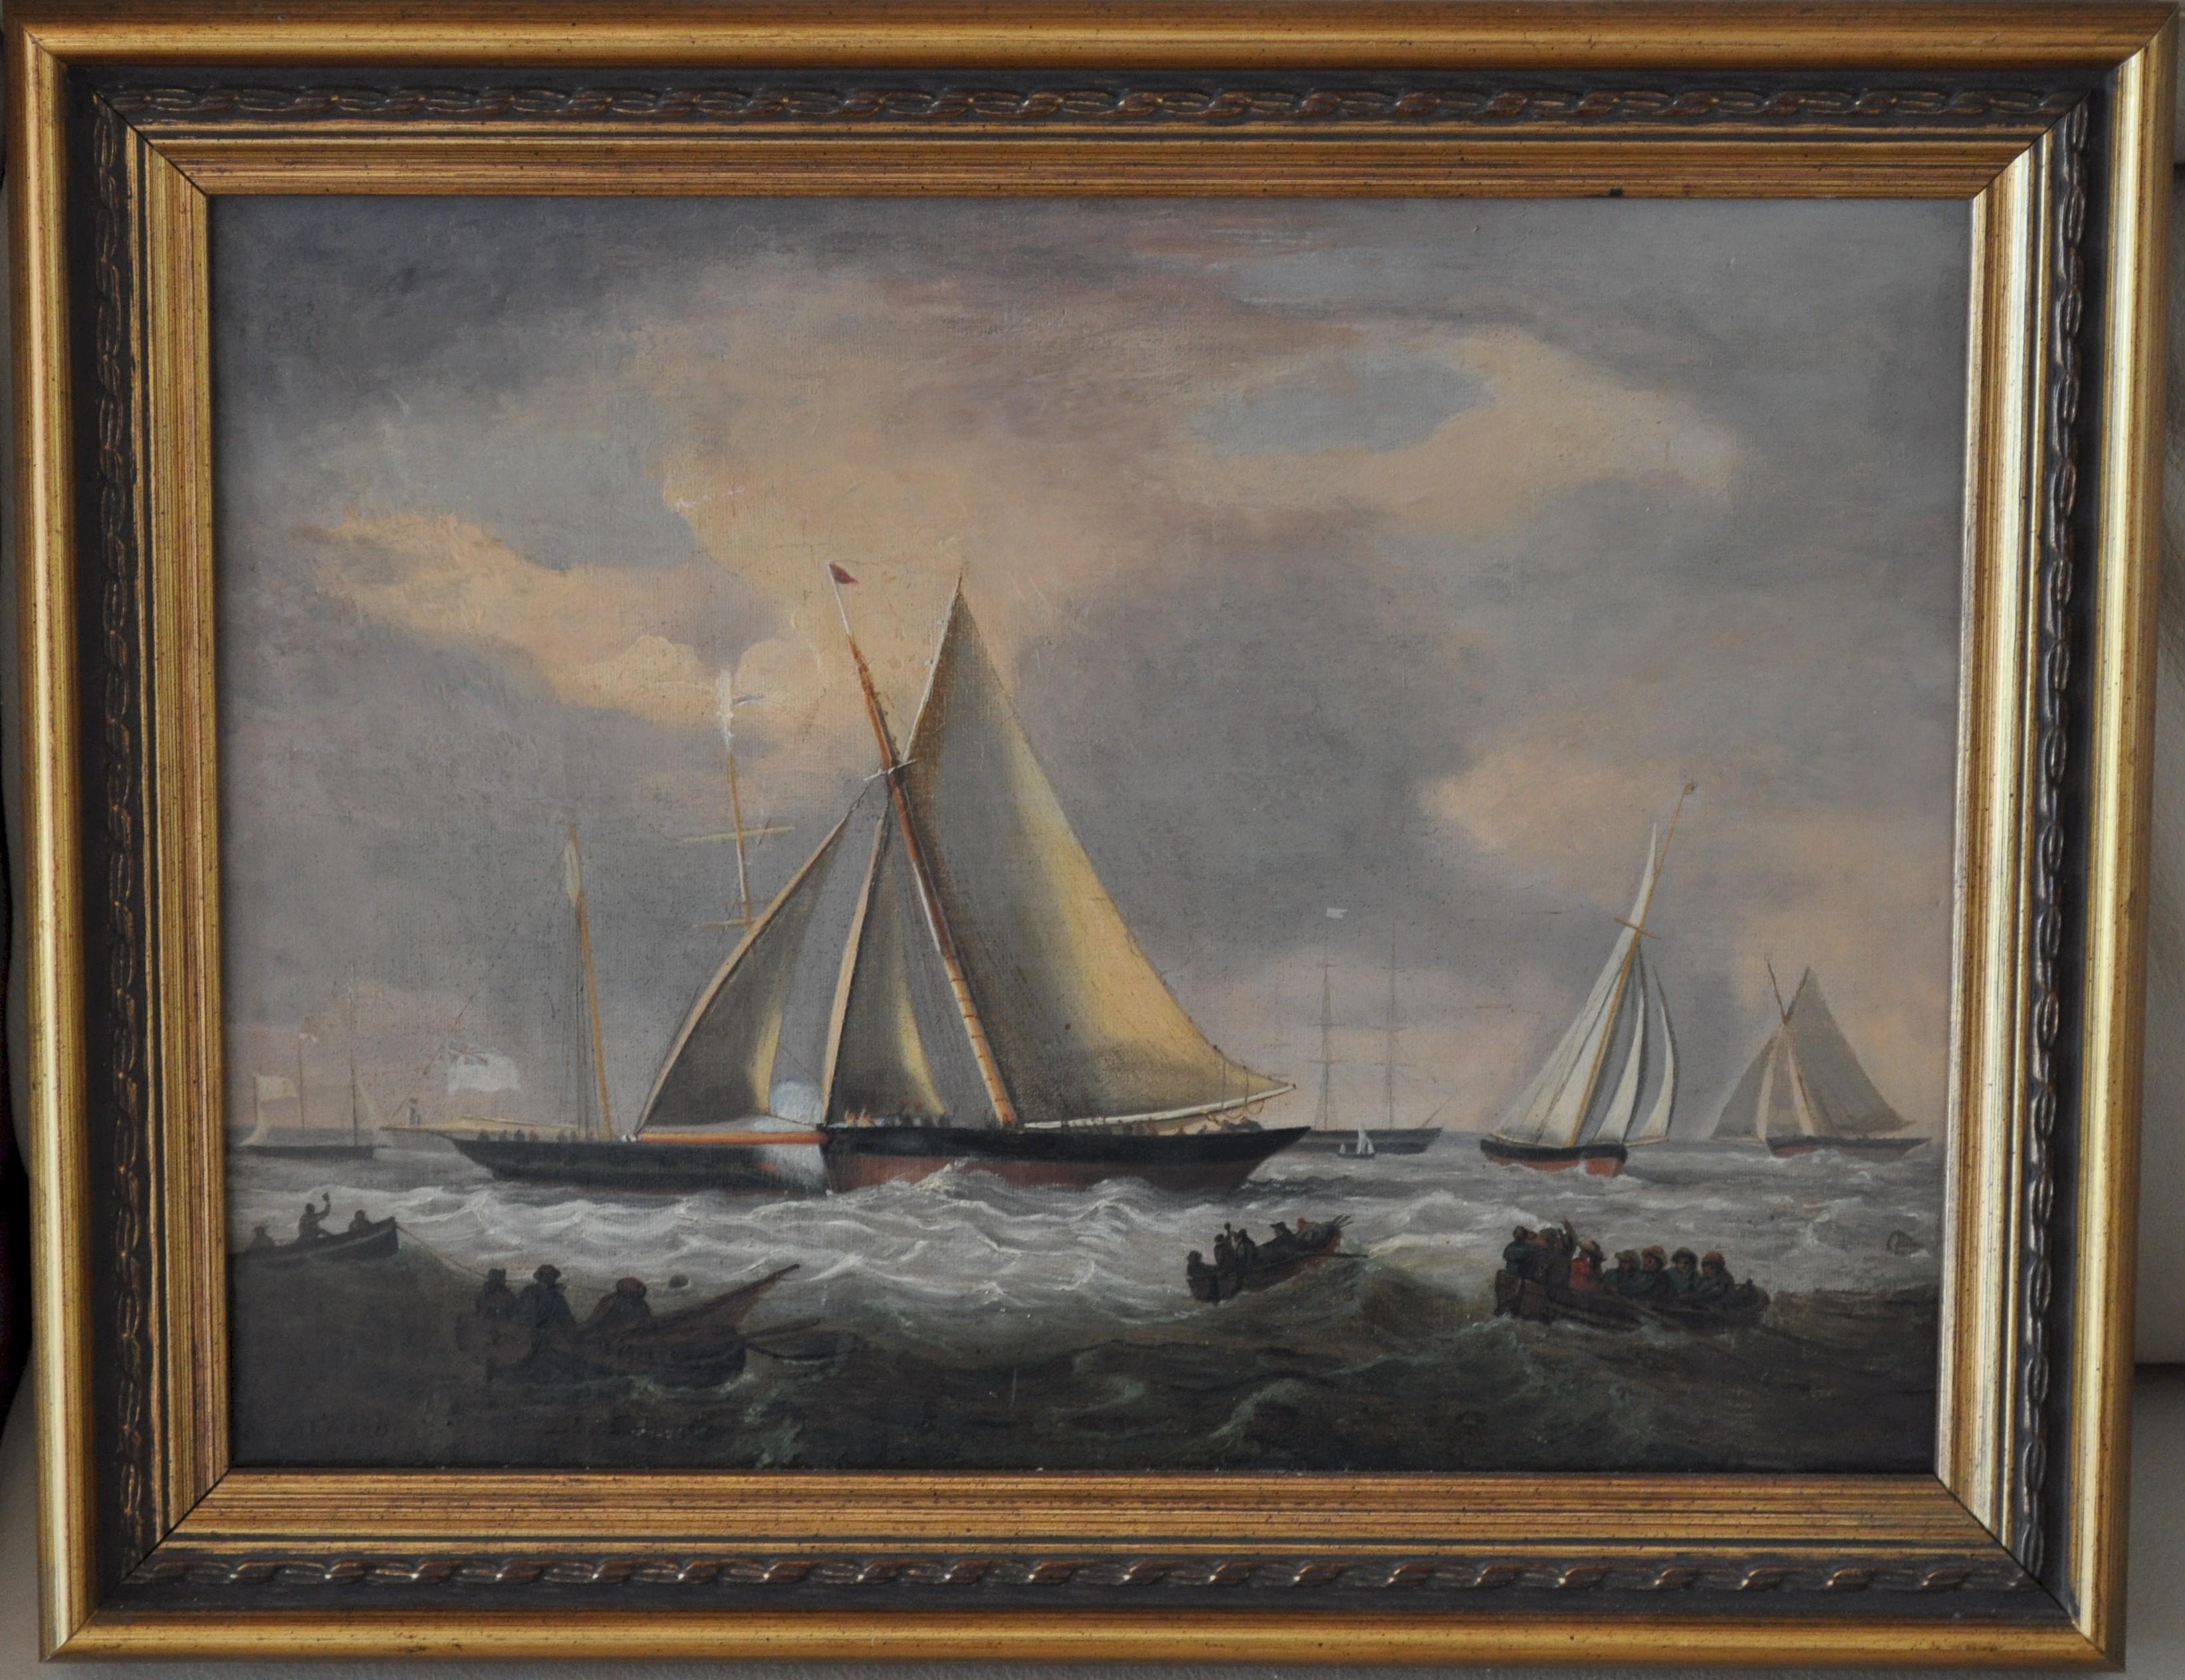 Naive 19th century marine oil on canvas - Painting by Unknown